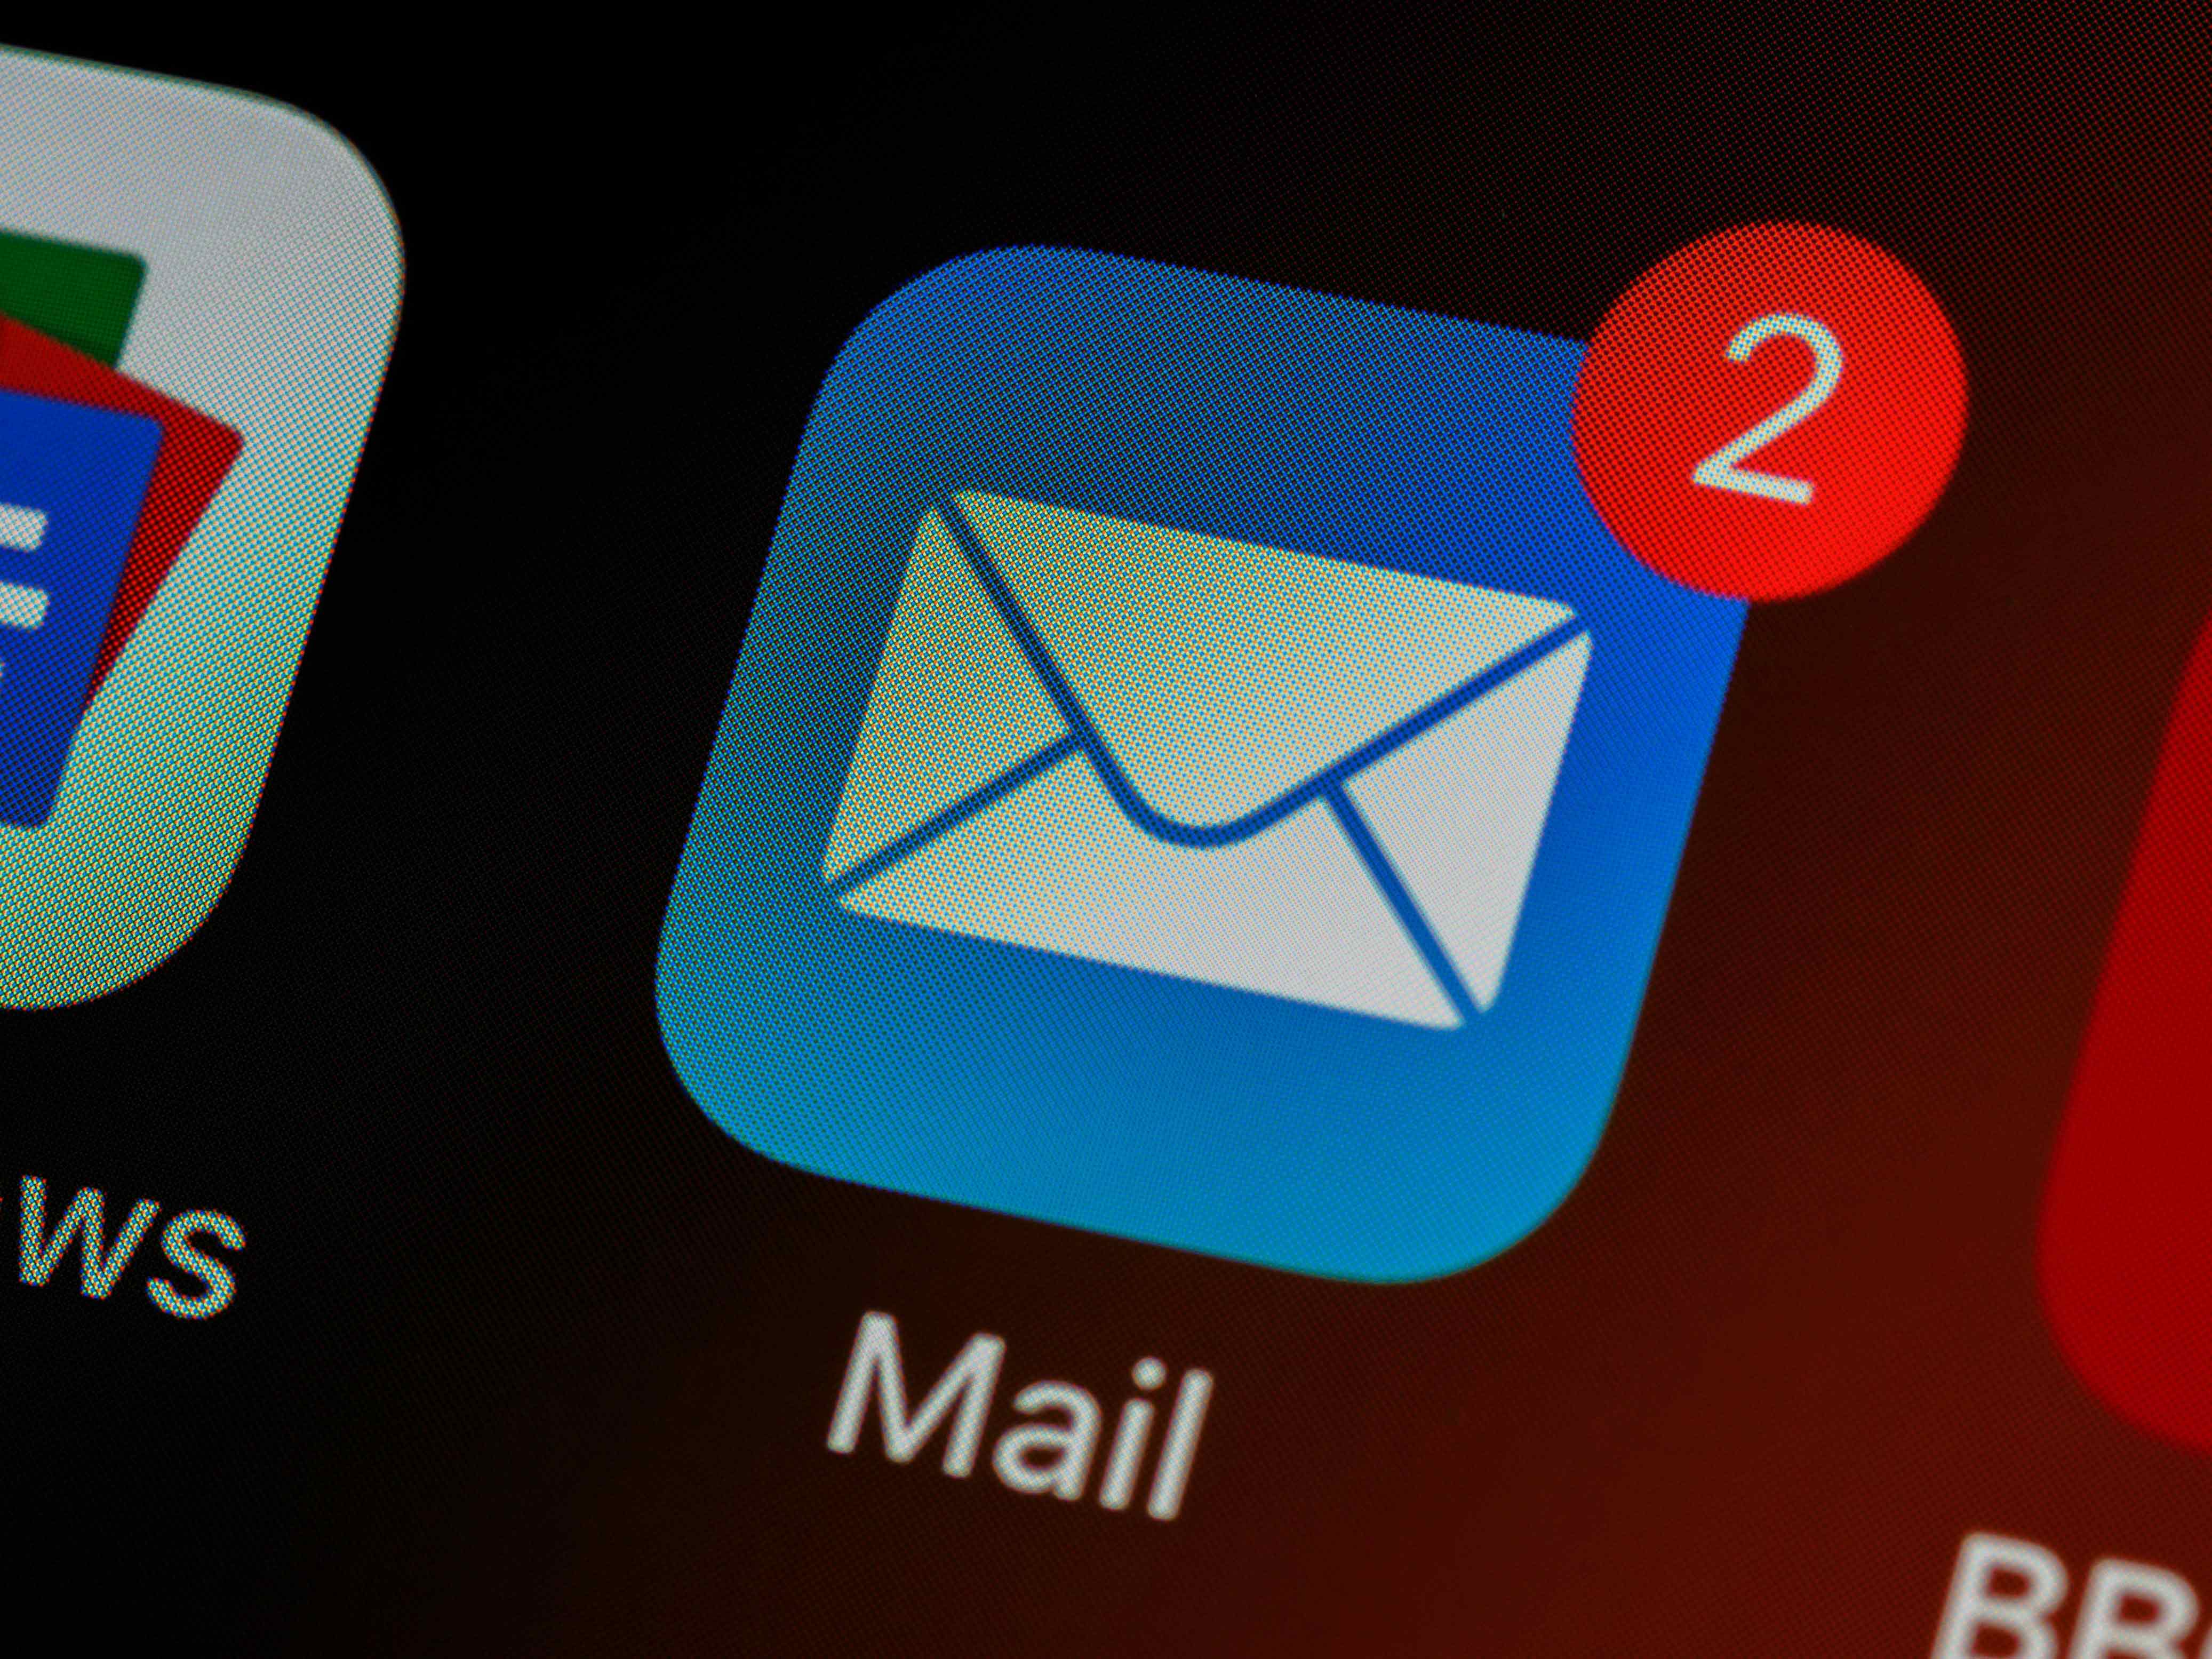 Dismissal by SMS or email may not be unlawful – but it’s extremely unwise